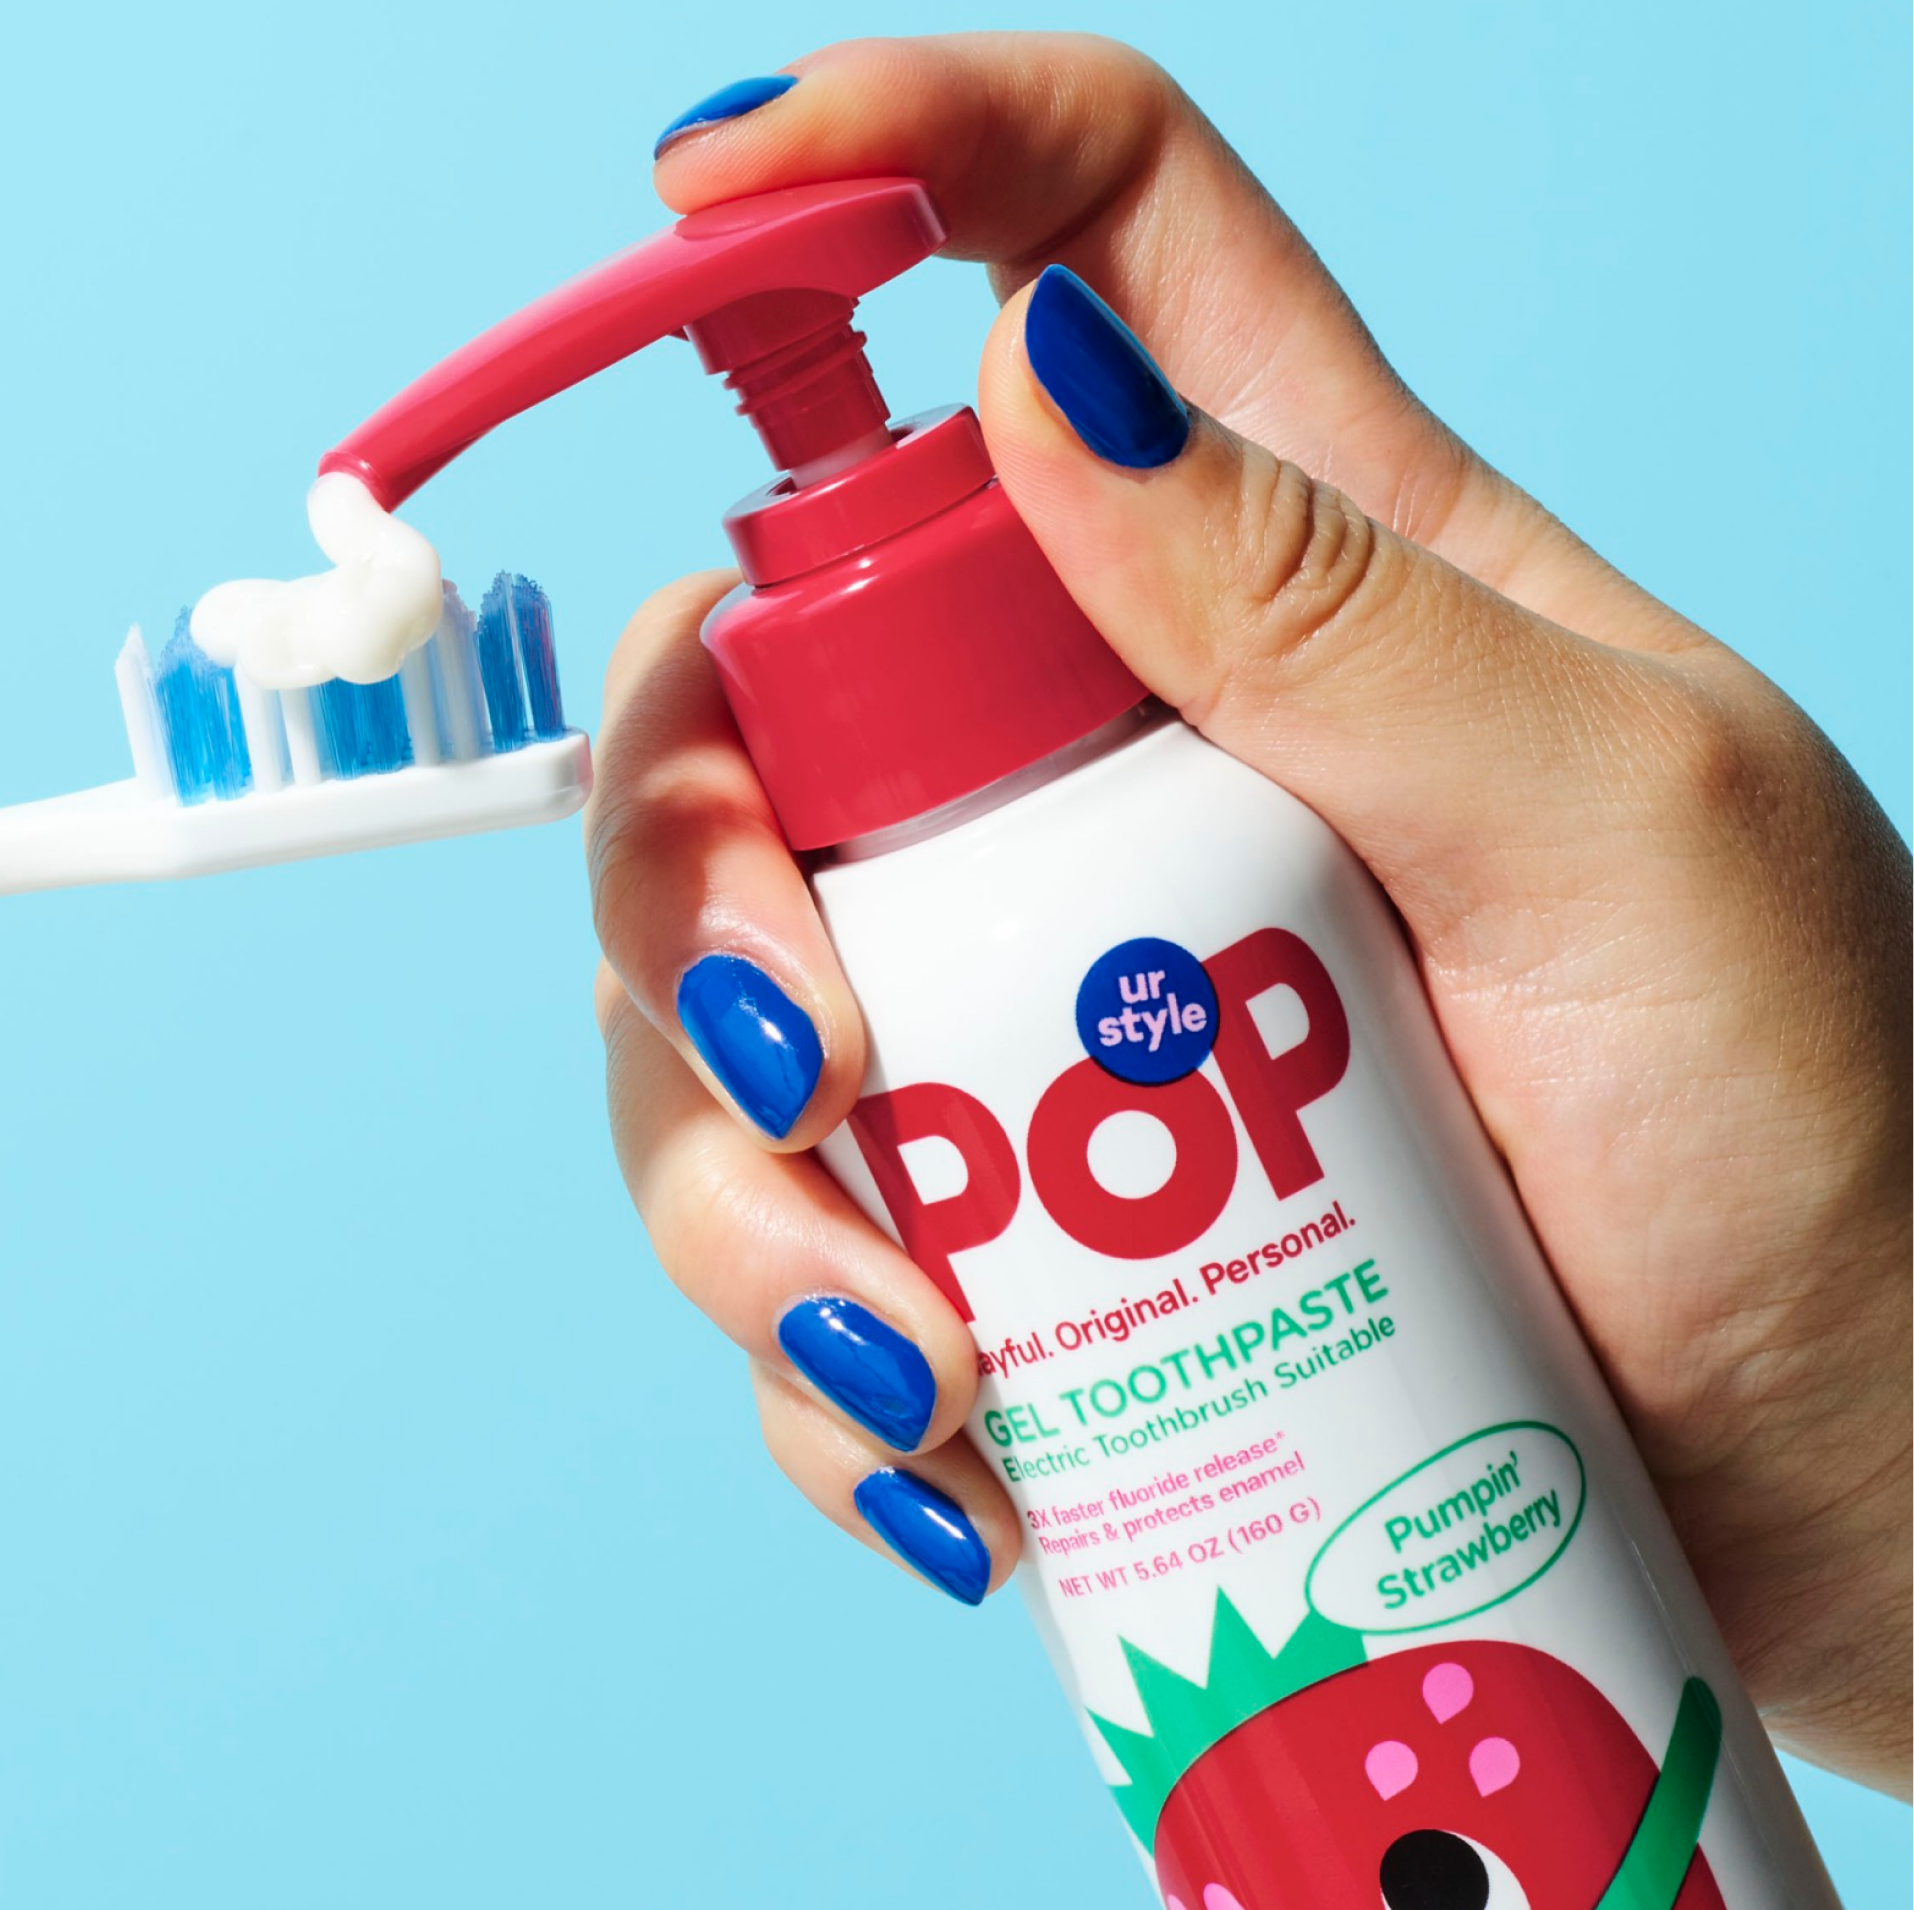 A hand holding a white bottle of POP Pumpin' Strawberry Gel Toothpaste, pumping the toothpaste out on a white-and-blue toothbrush ona a light blue background.